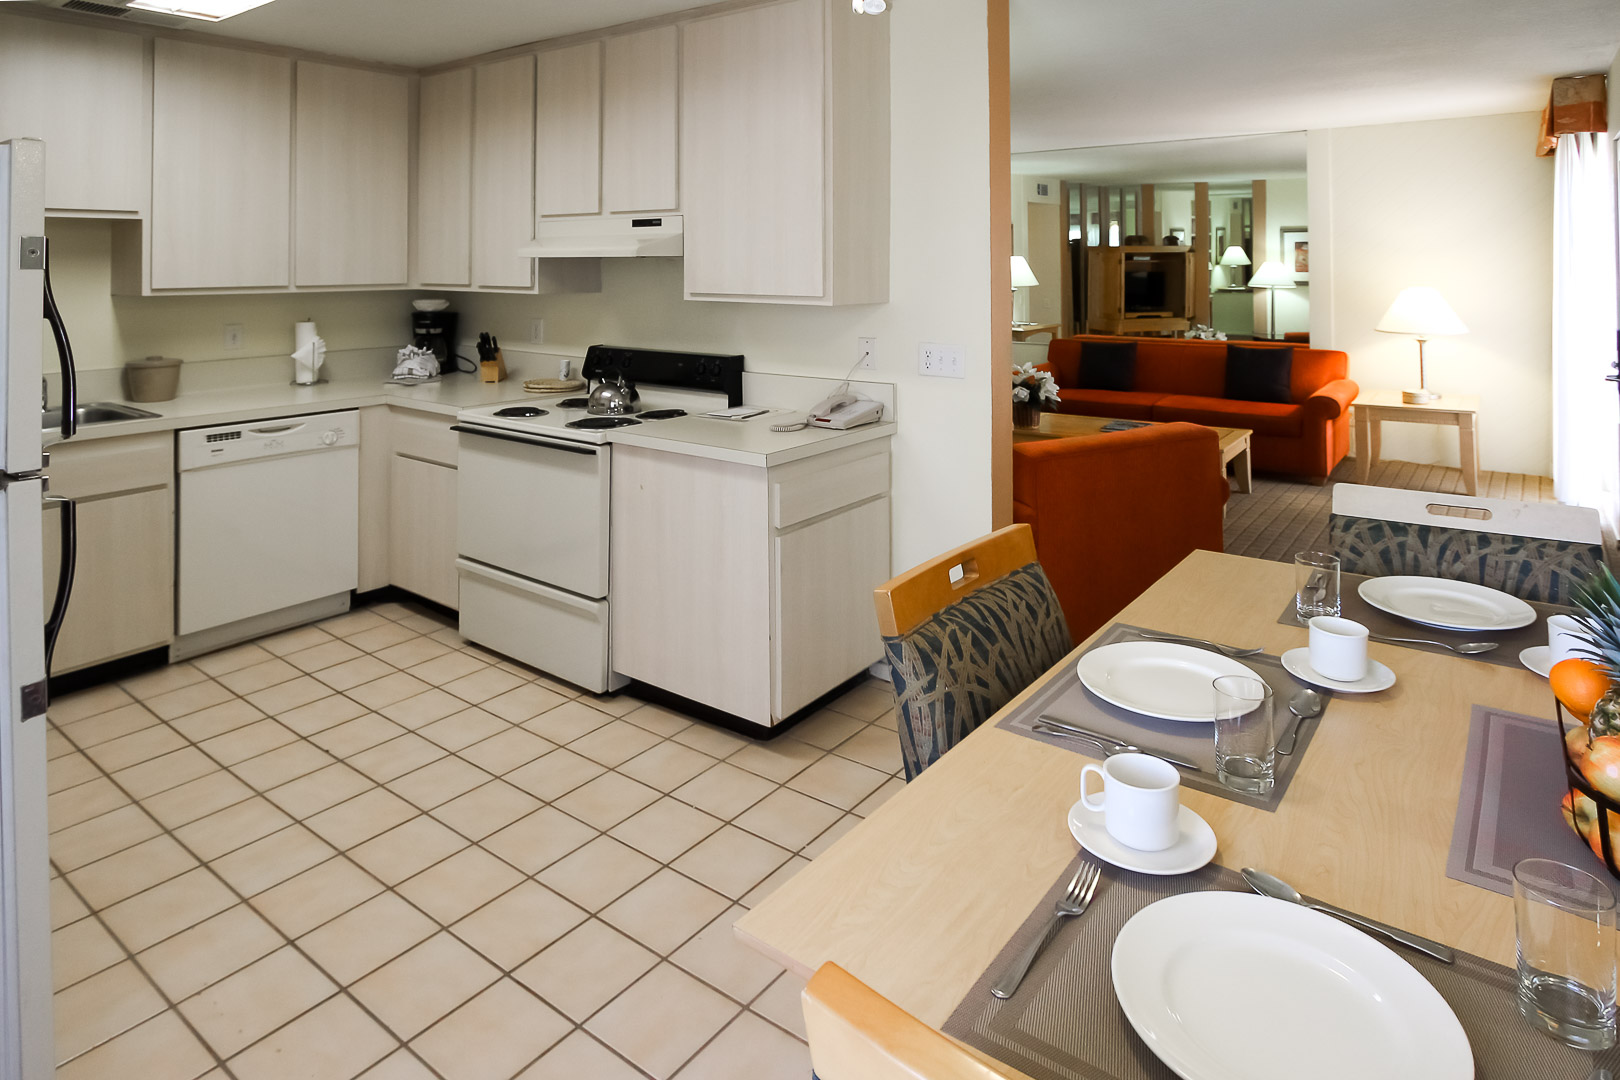 A clean kitchen area and dining table at VRI's Desert Vacation Villas in Palm Springs California.